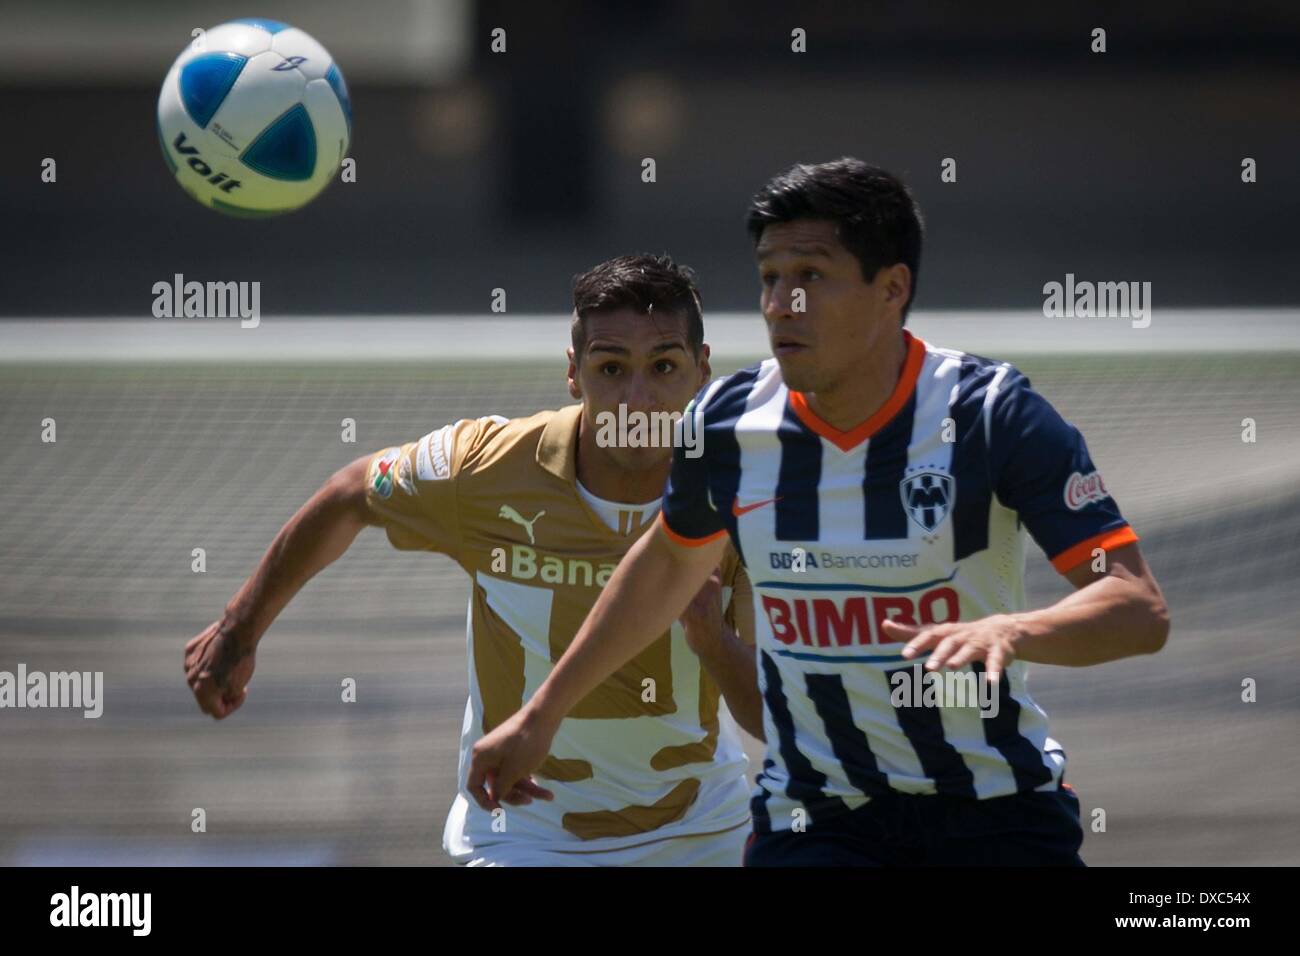 Mexico City, Mexico. 23rd Mar, 2014. Ismael Sosa (L) of UNAM's Pumas vies for the ball with Ricardo Osorio of Monterrey during a match of the 2014 MX League Closing Tournament at University Olympic Stadium in Mexico City, capital of Mexico, on March 23, 2014. © Pedro Mera/Xinhua/Alamy Live News Stock Photo